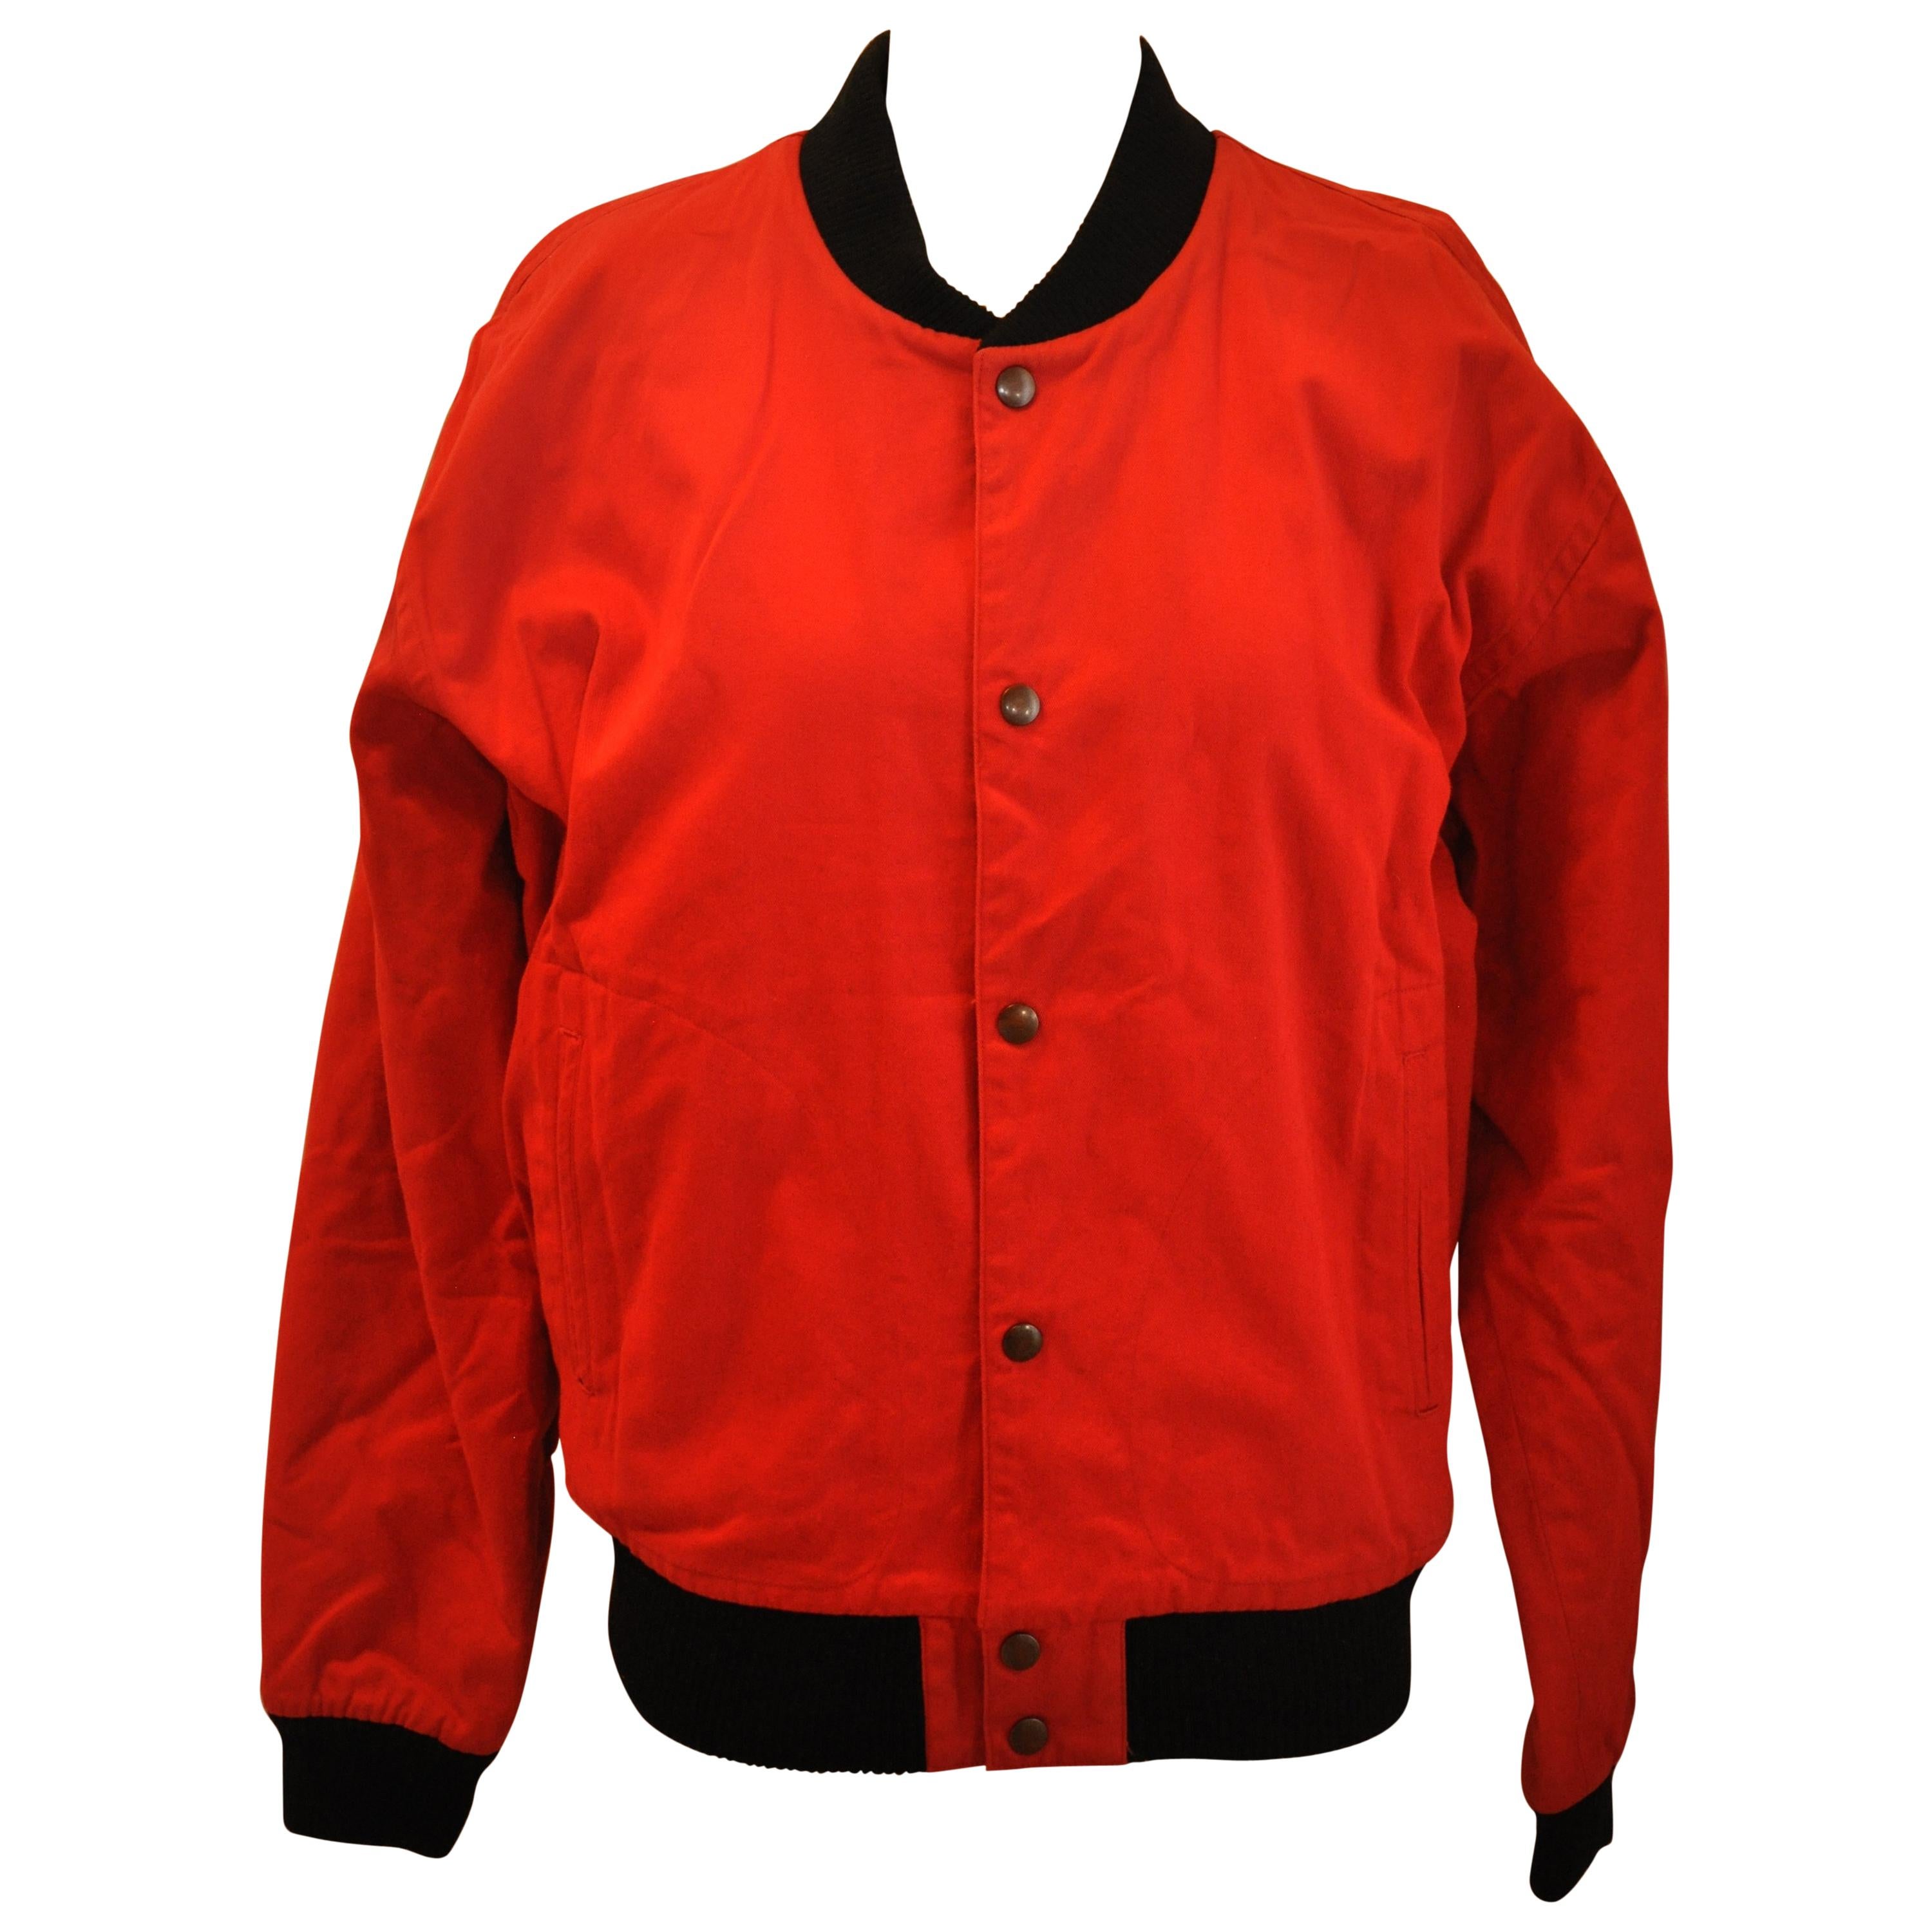 Iconic Yohji Yamamoto Signature Embroidered "Tiger" Bold Red Snap-Front Jacket For Sale